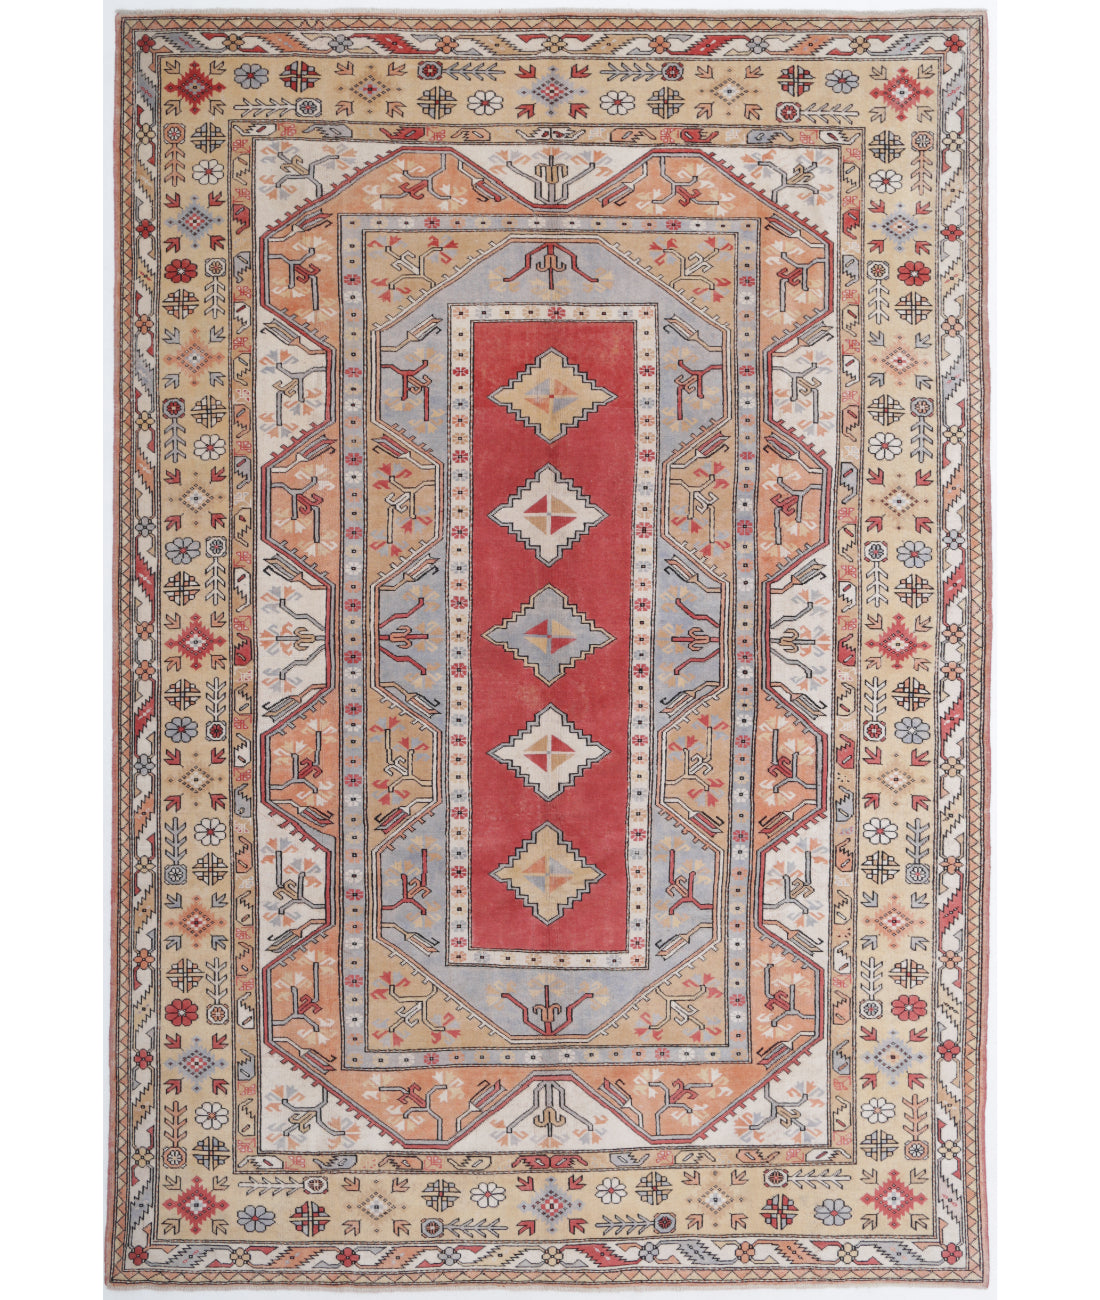 Hand Knotted Vintage Turkish Milas Wool Rug - 8'4'' x 12'4'' 8'4'' x 12'4'' (250 X 370) / Multi / Gold